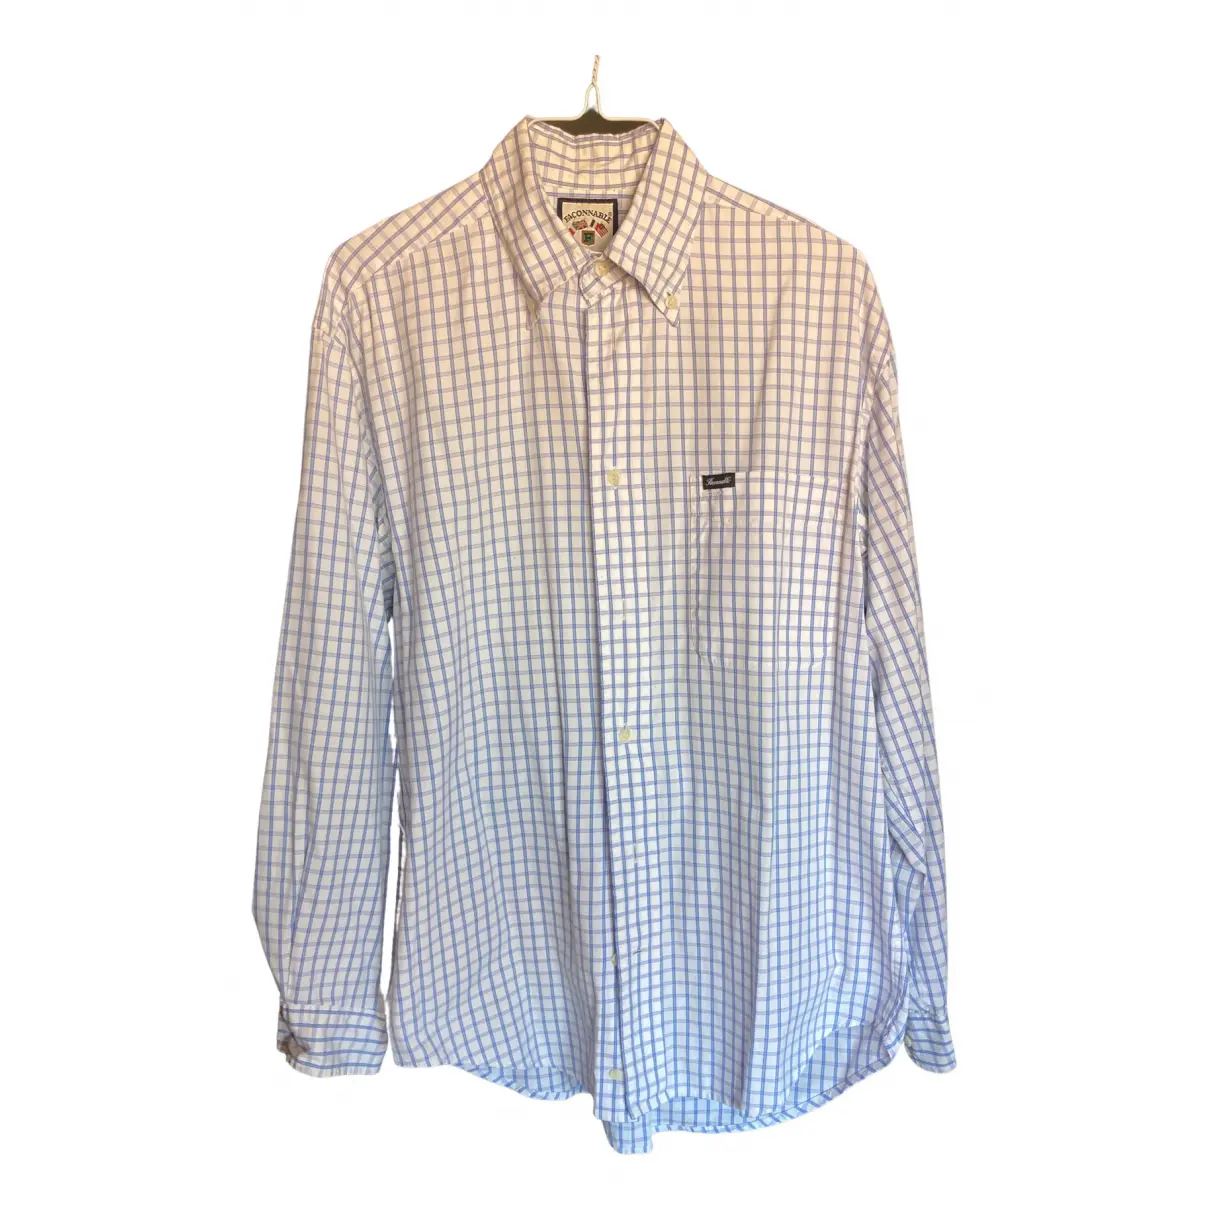 Shirt Faconnable - Vintage